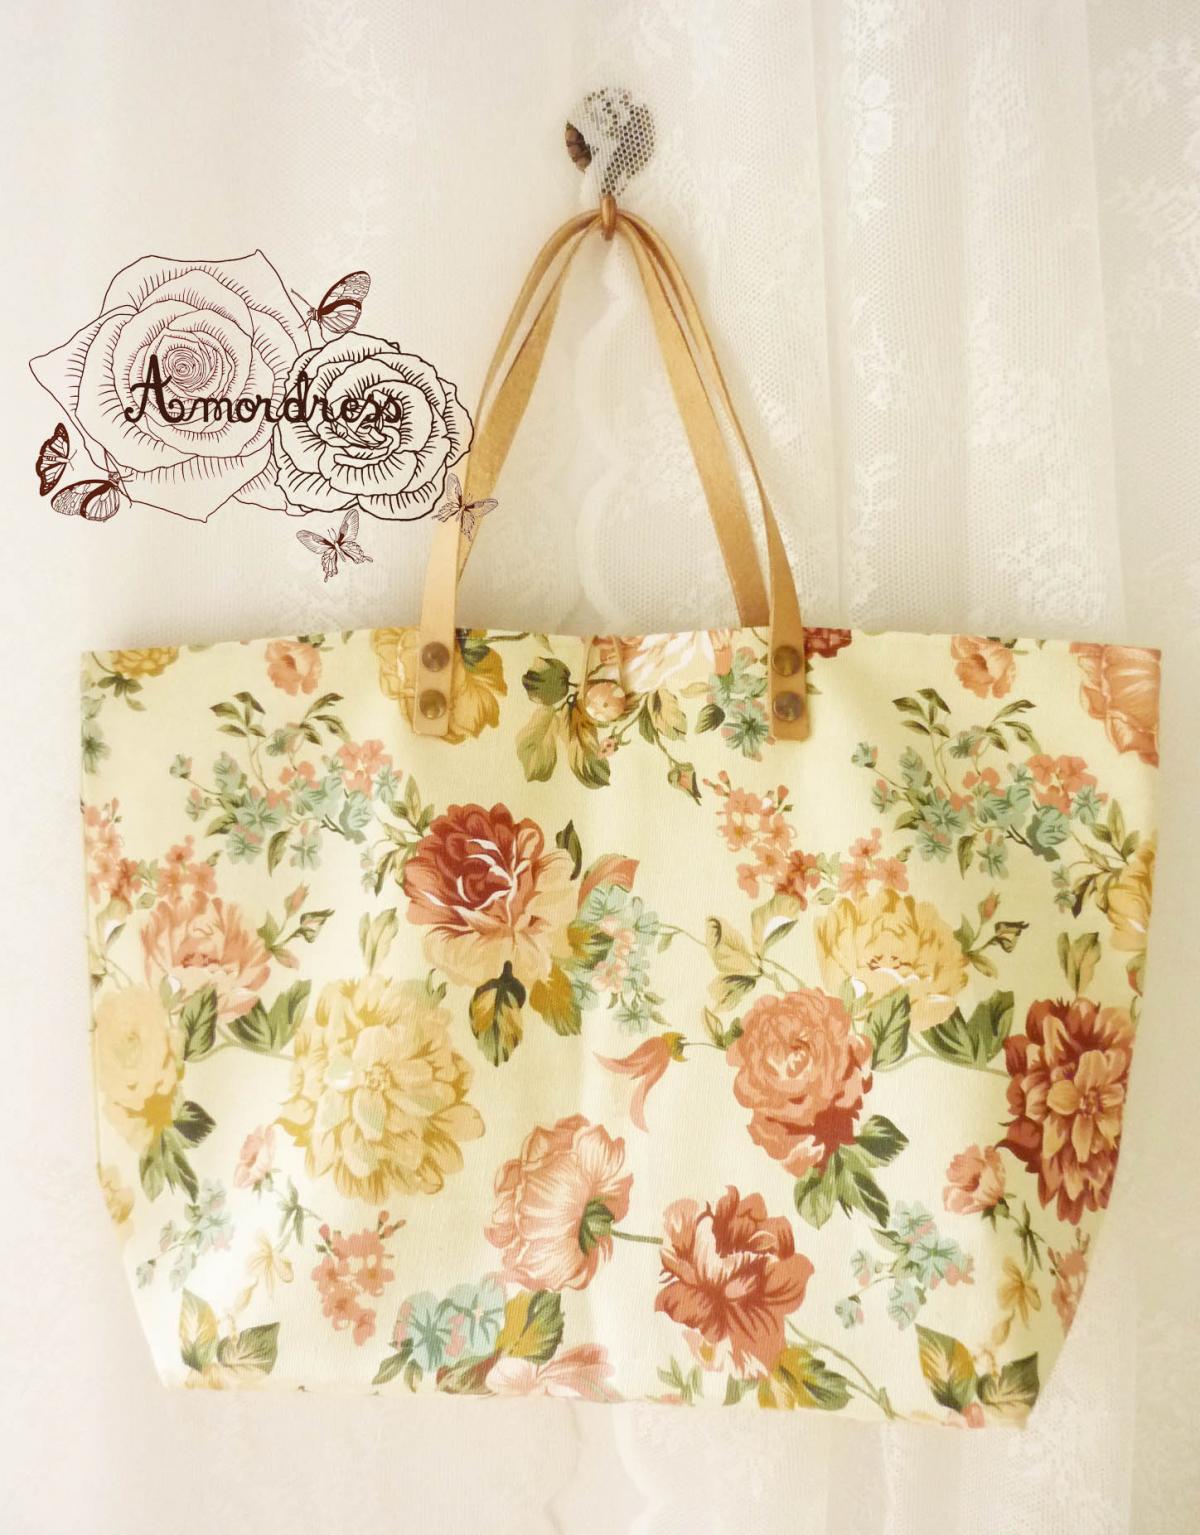 Floral Tote Bag Printed Canvas Bag Genuine Leather Strap Cream With Autumn Rose Shabby Chic Bag ...amor The Inspired Collection...